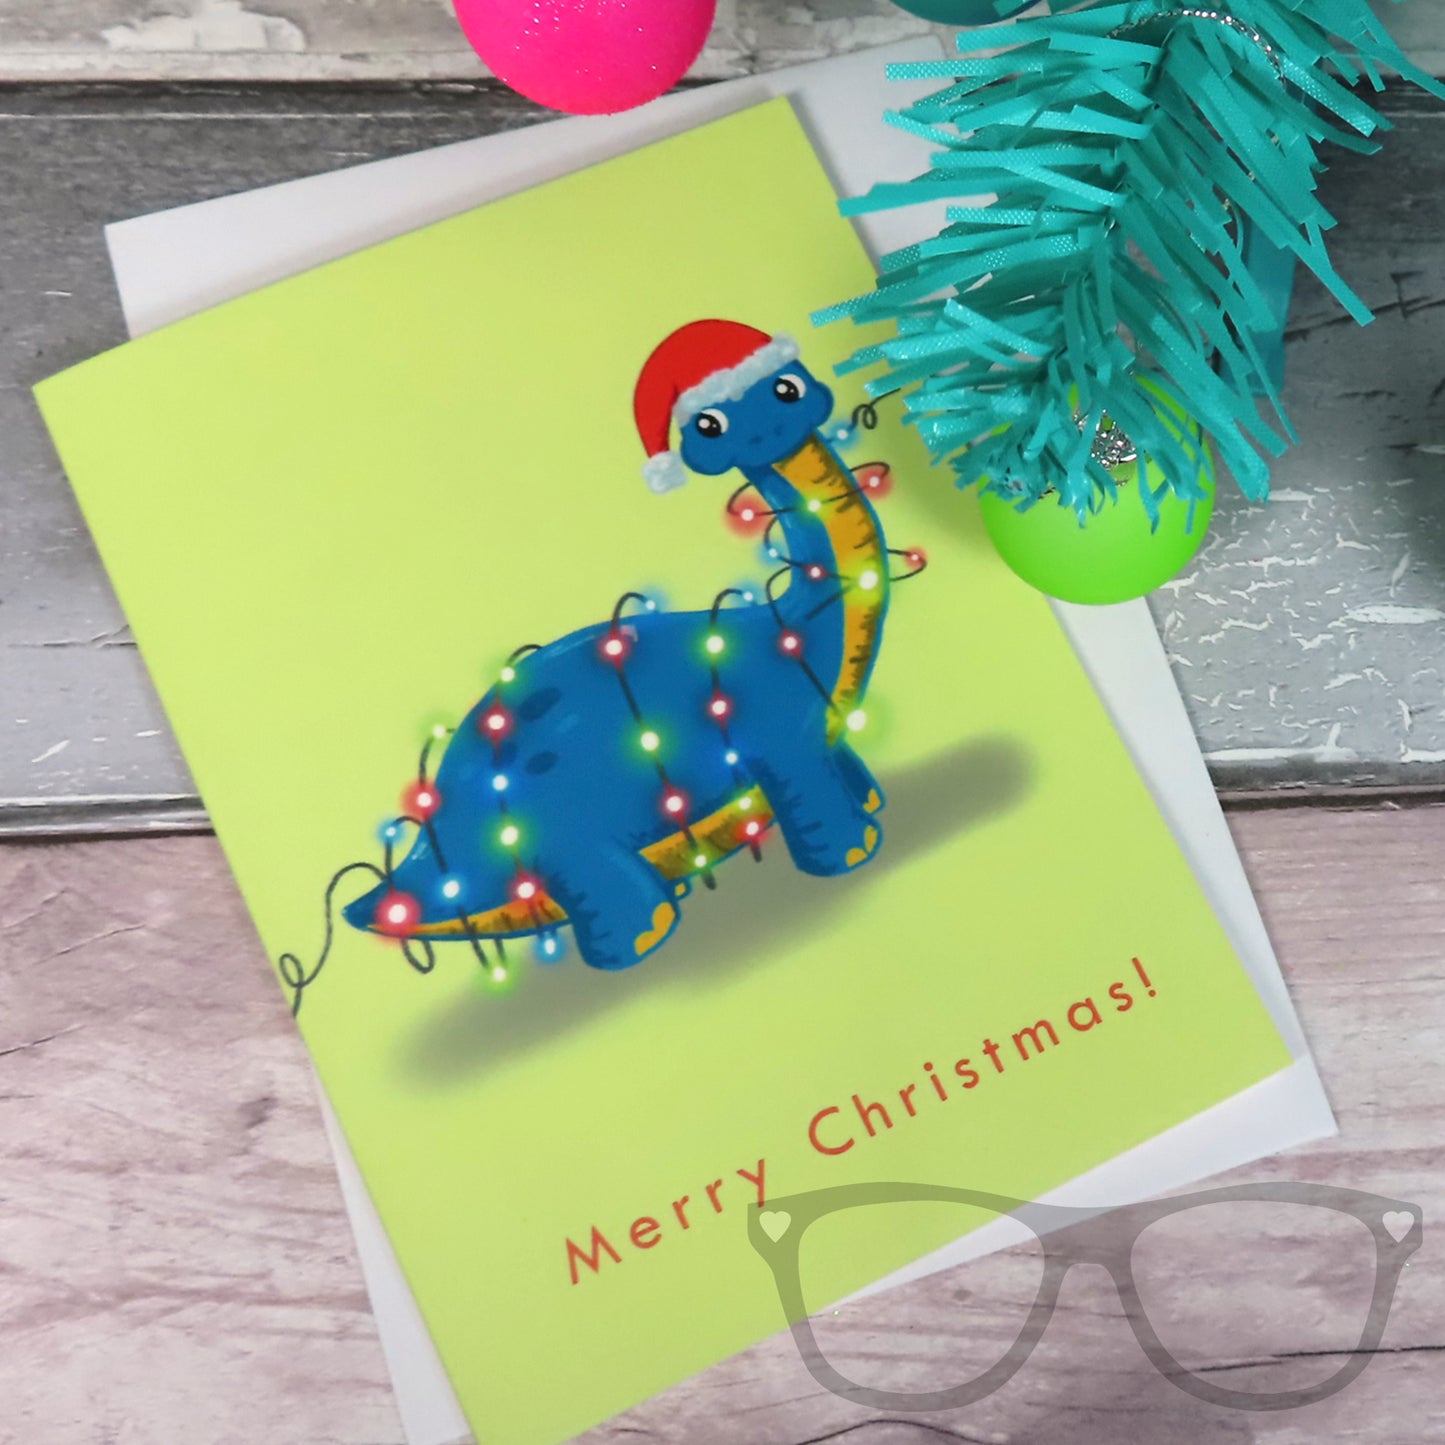 Dinosaur Christmas greeting card, features Brenda the Brachiosaurus tangled up in some fairy lights. Car dis shown flat on the surface with an envelope underneath